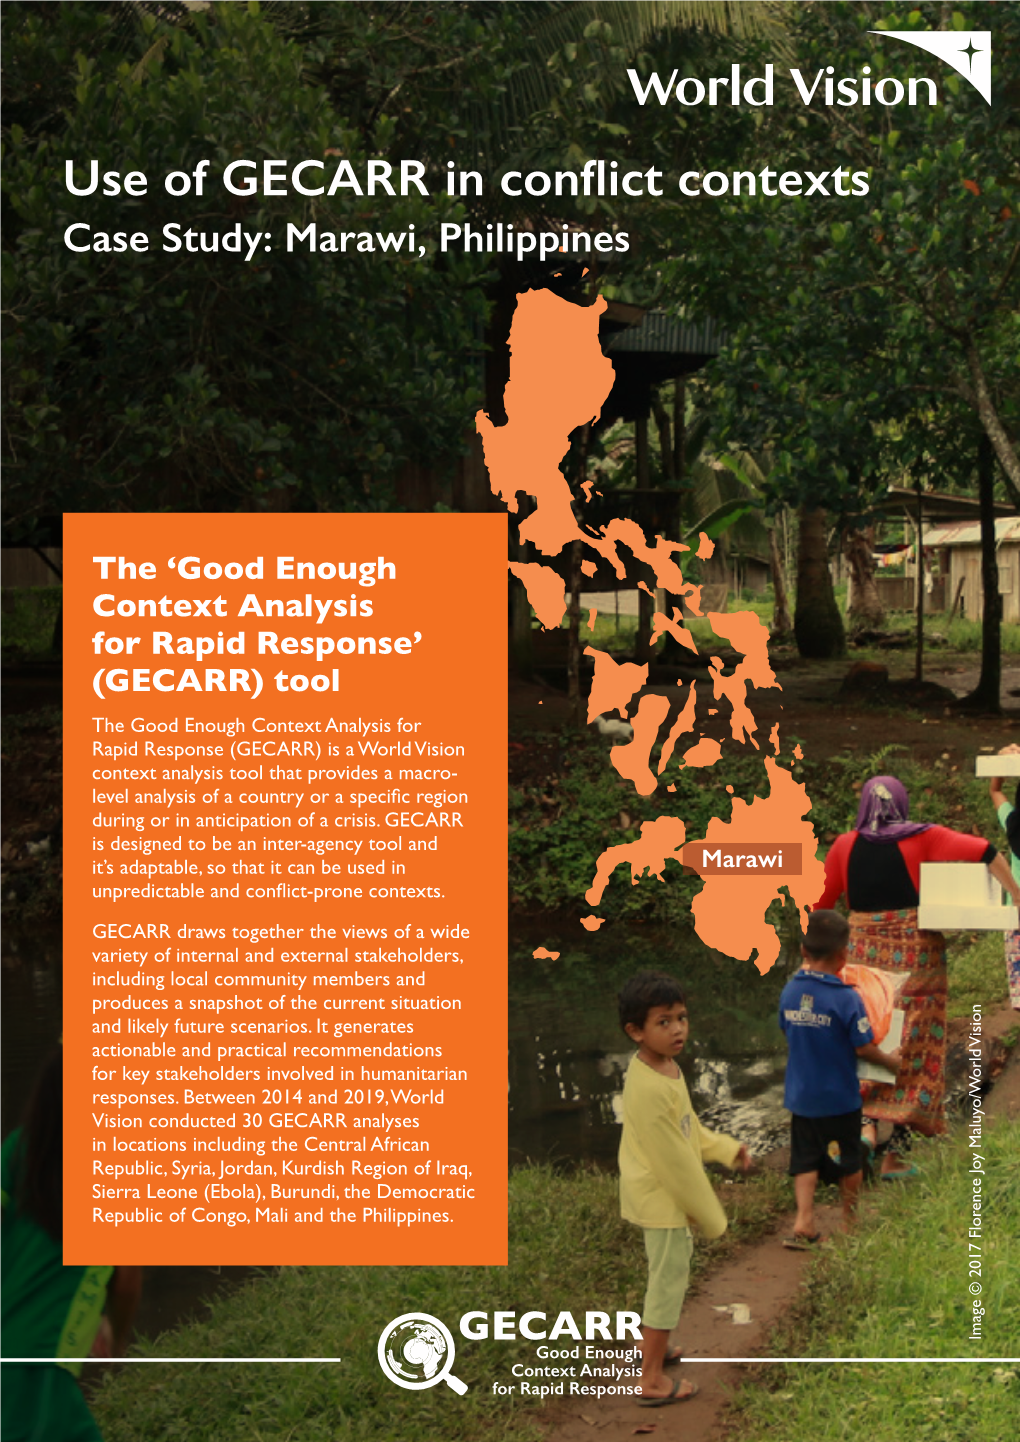 Use of GECARR in Conflict Contexts Case Study: Marawi, Philippines